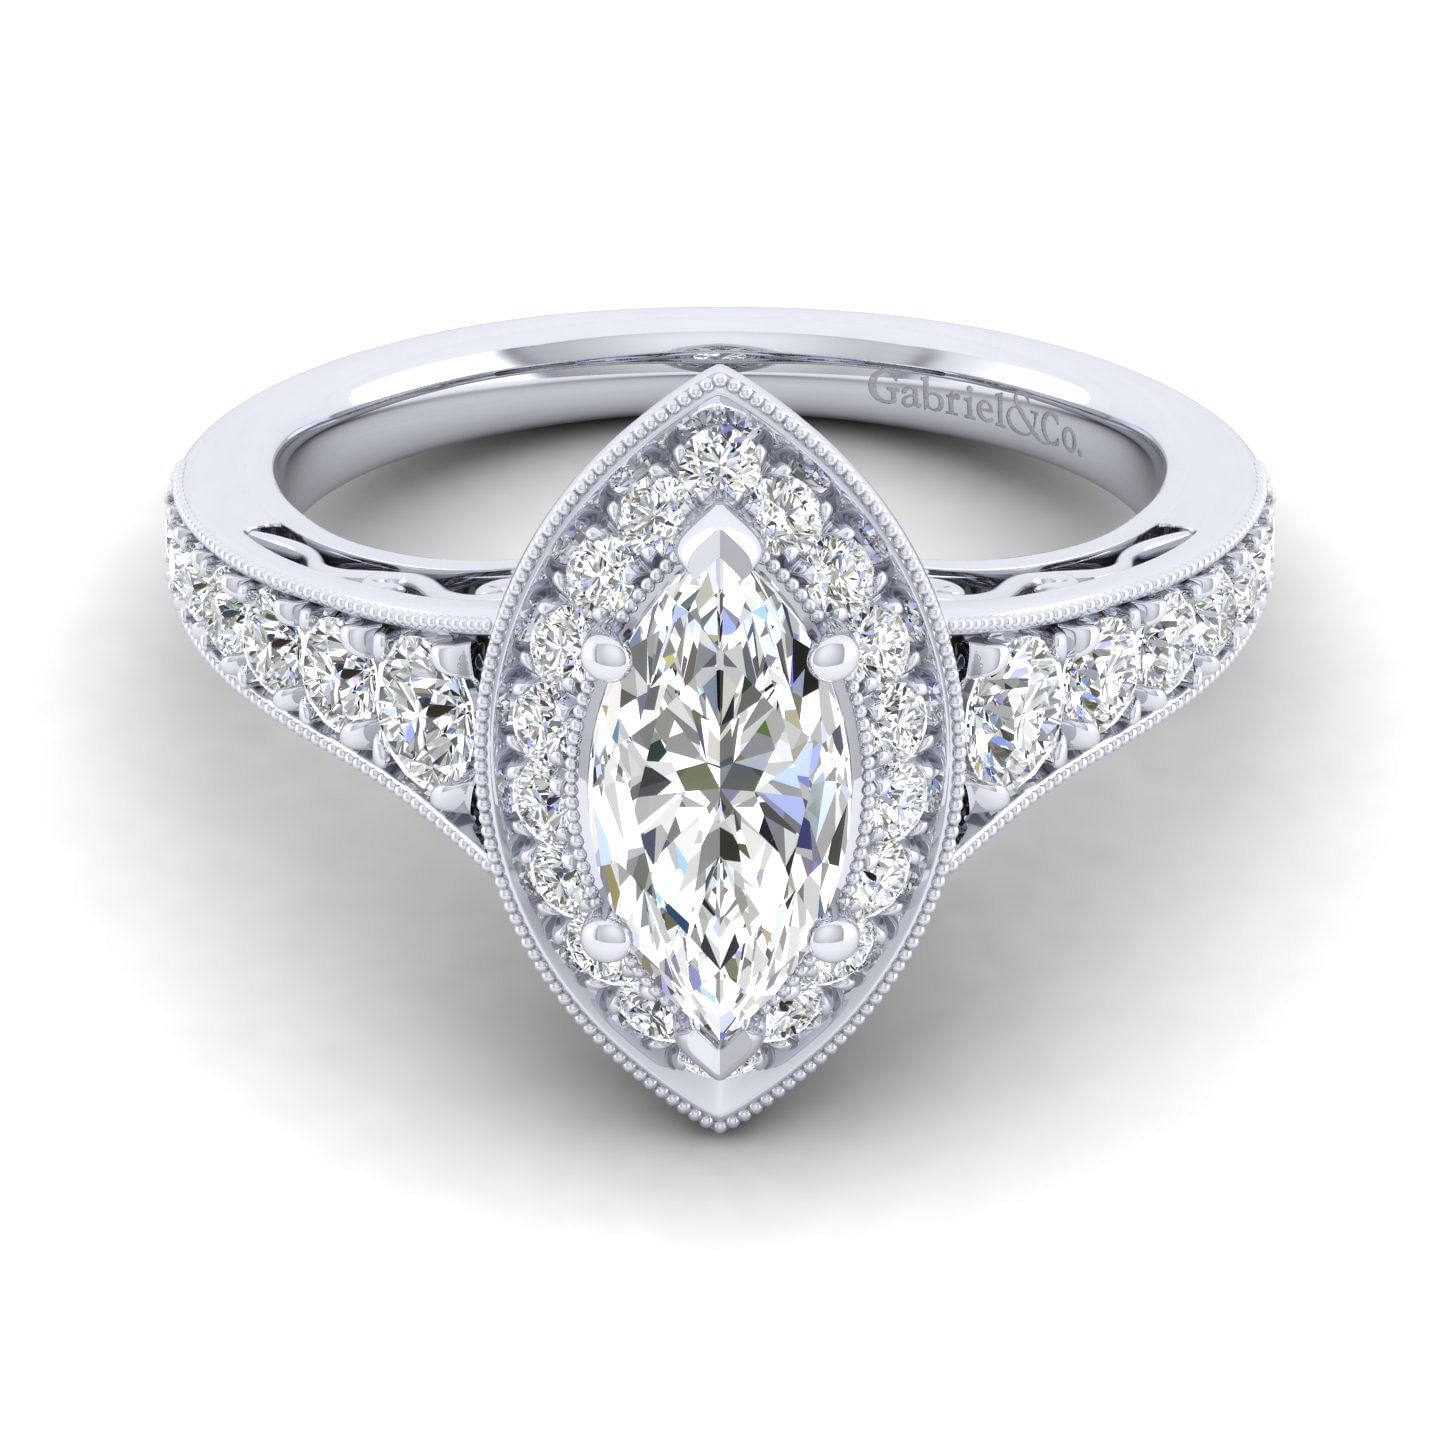 Cortlandt - Vintage Inspired 14K White Gold Marquise Halo Diamond Engagement Ring